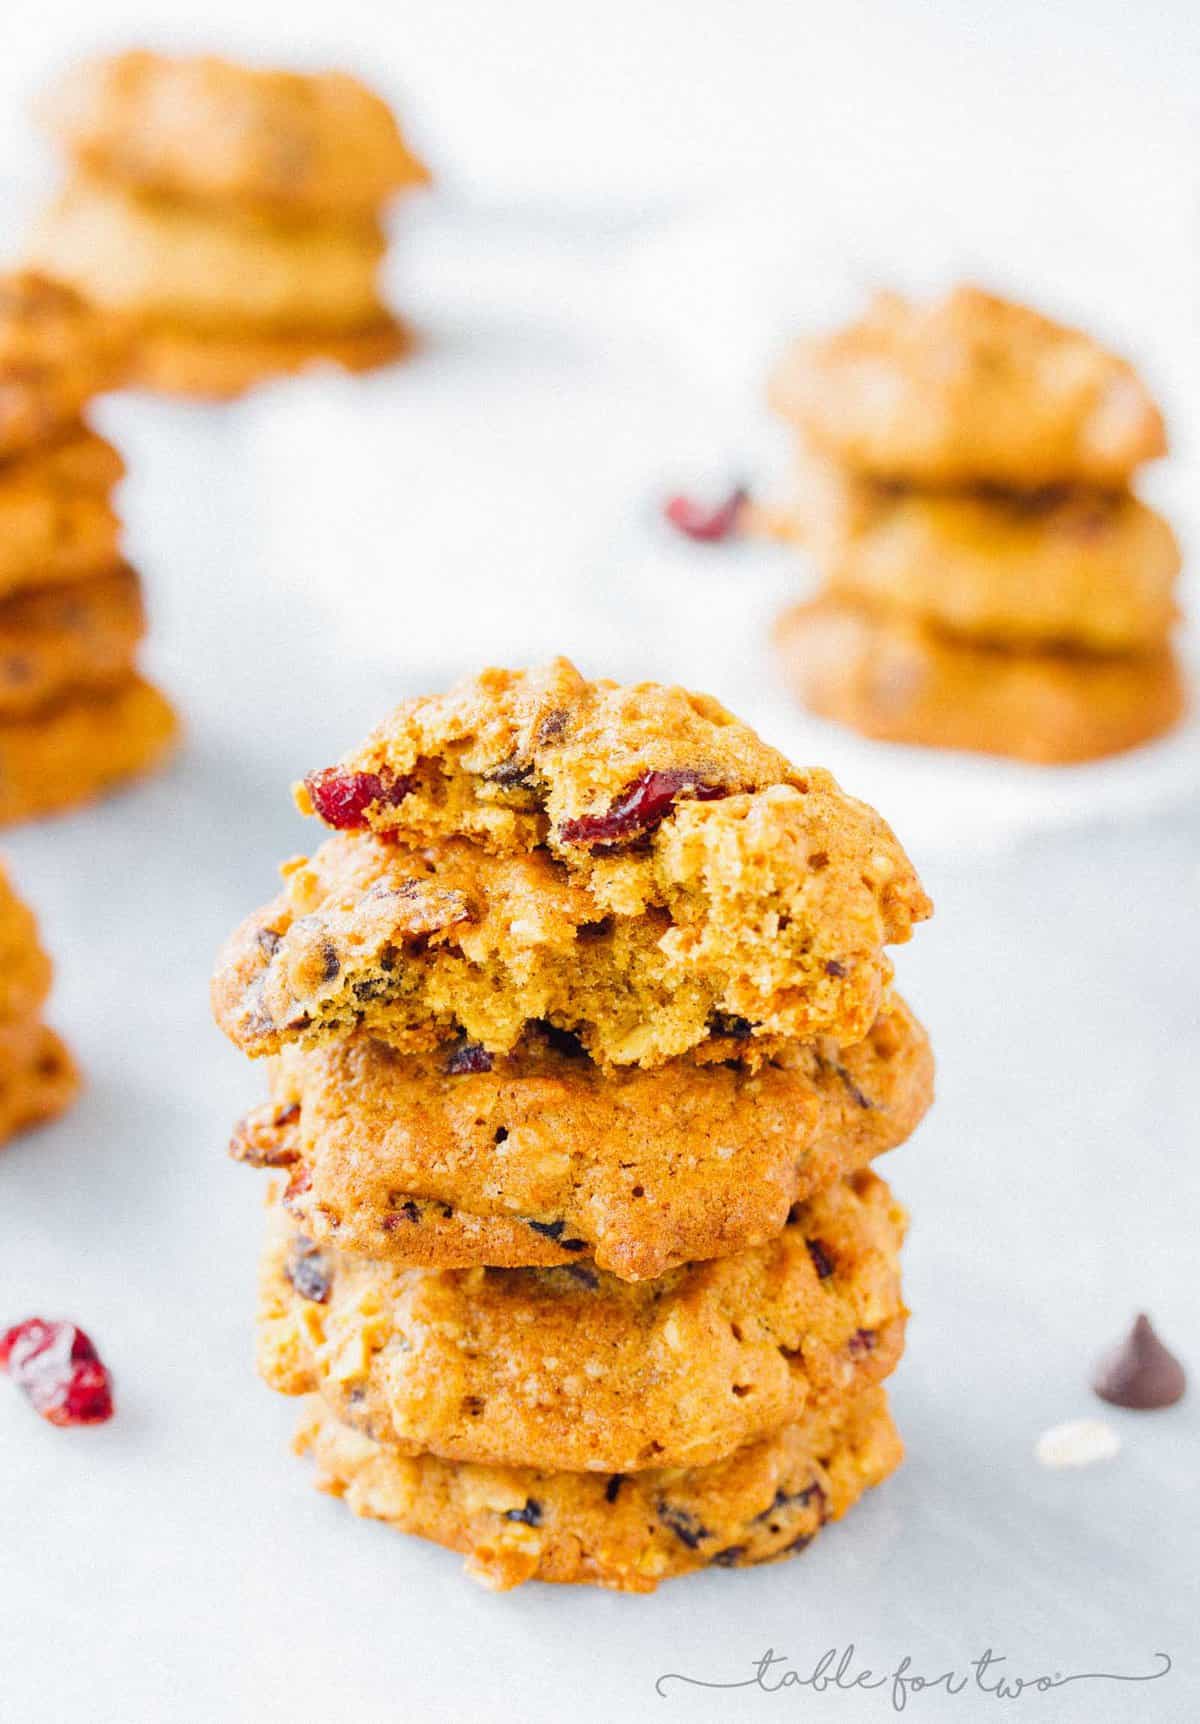 Pumpkin oatmeal cookies with dried cranberries and chocolate chips for a wonderful Fall-inspired cookie that will leave everyone begging for more!